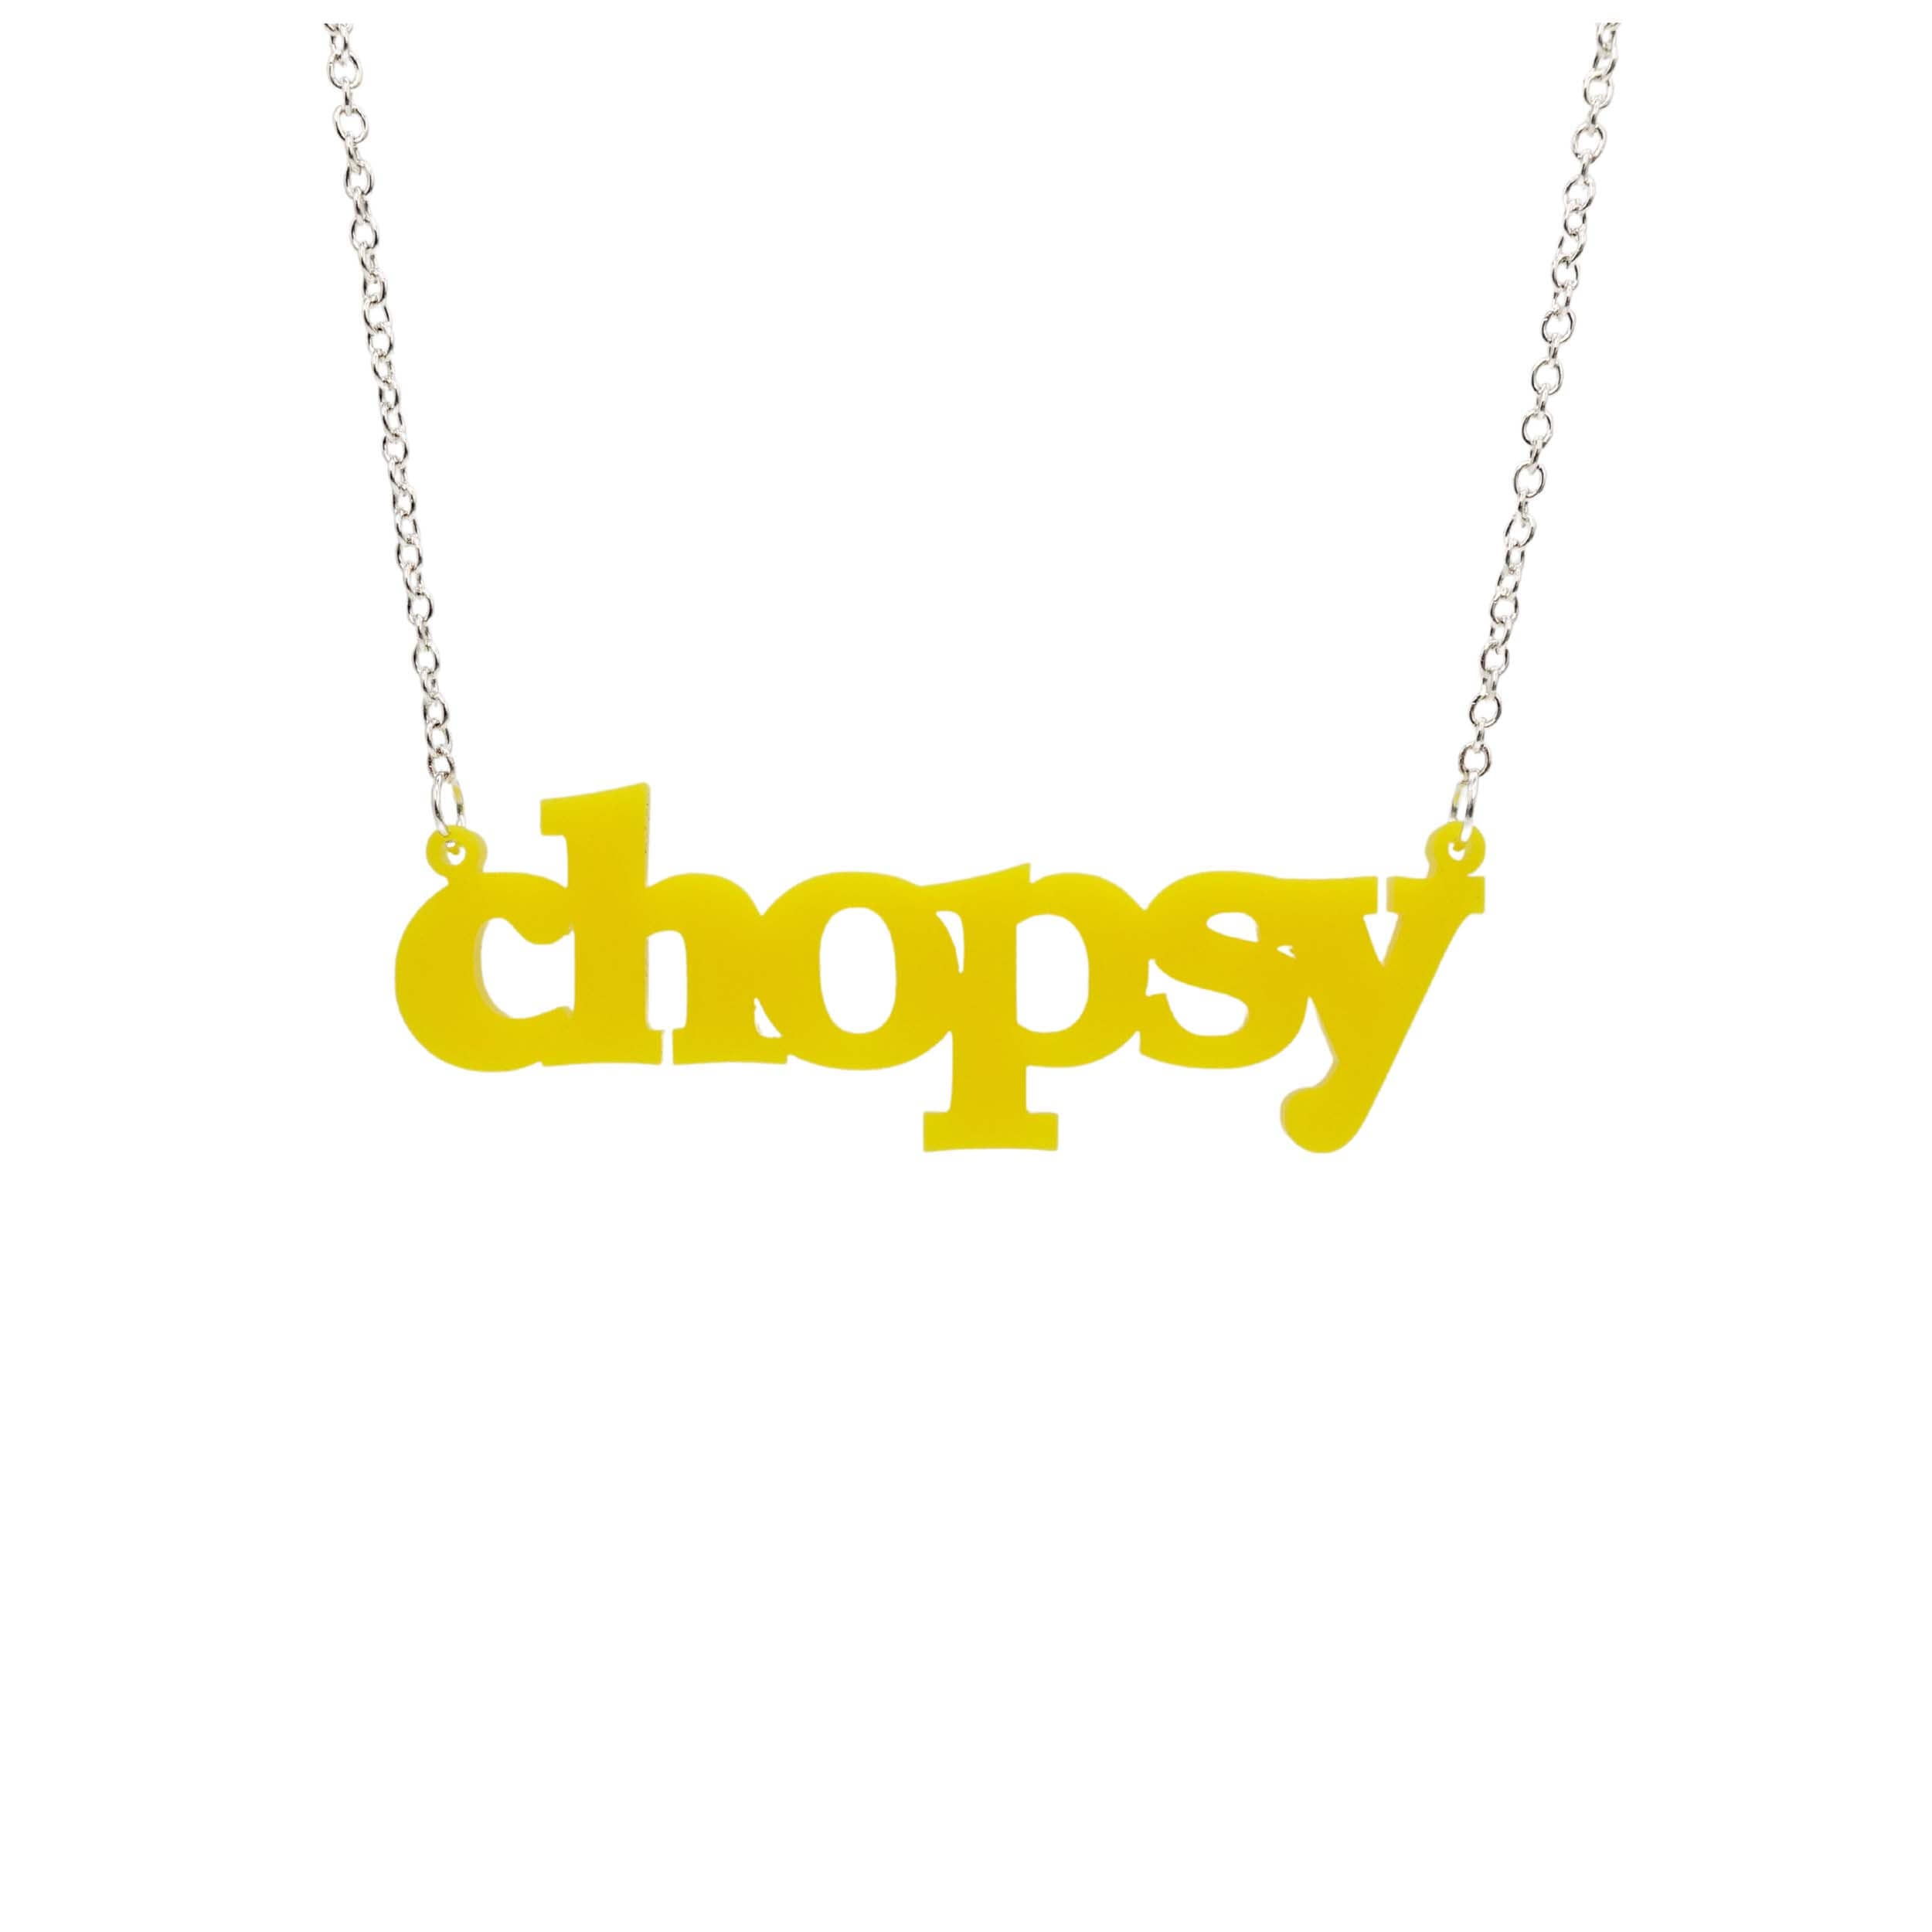 Lemon Chopsy necklace shown hanging against a white backround. 